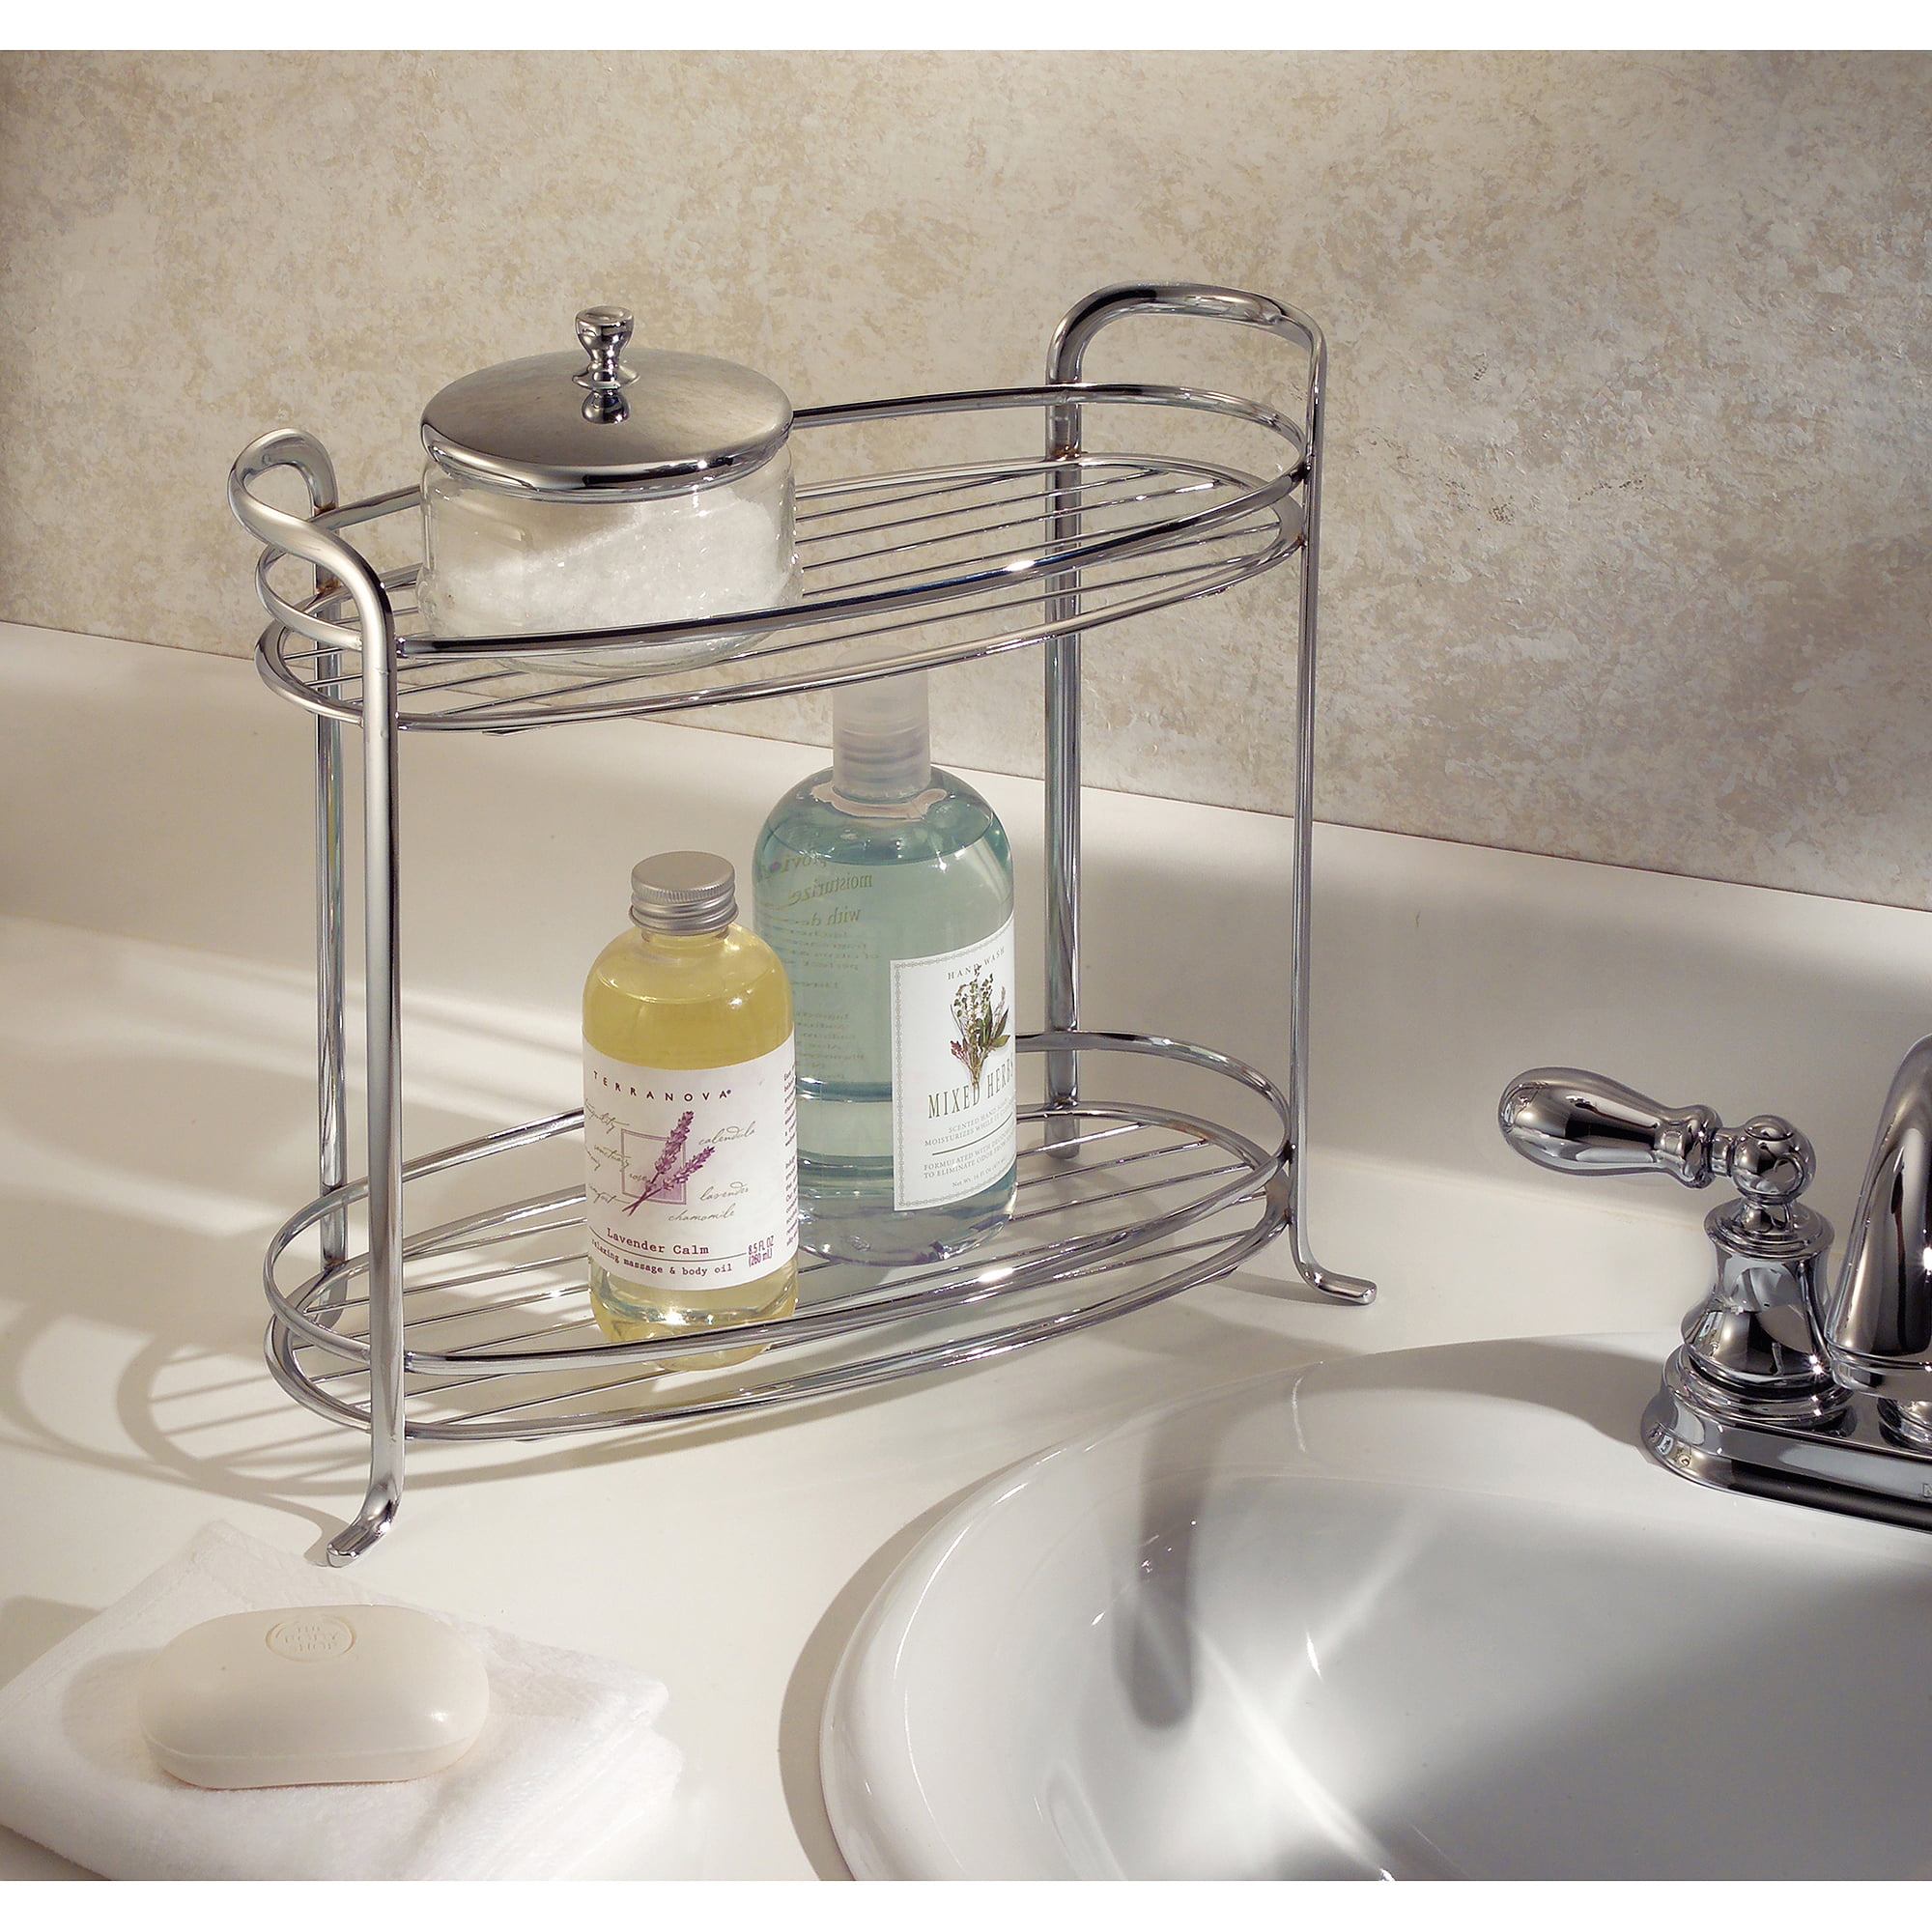 Interdesign Axis Free Standing Bathroom Storage Shelves For Towels